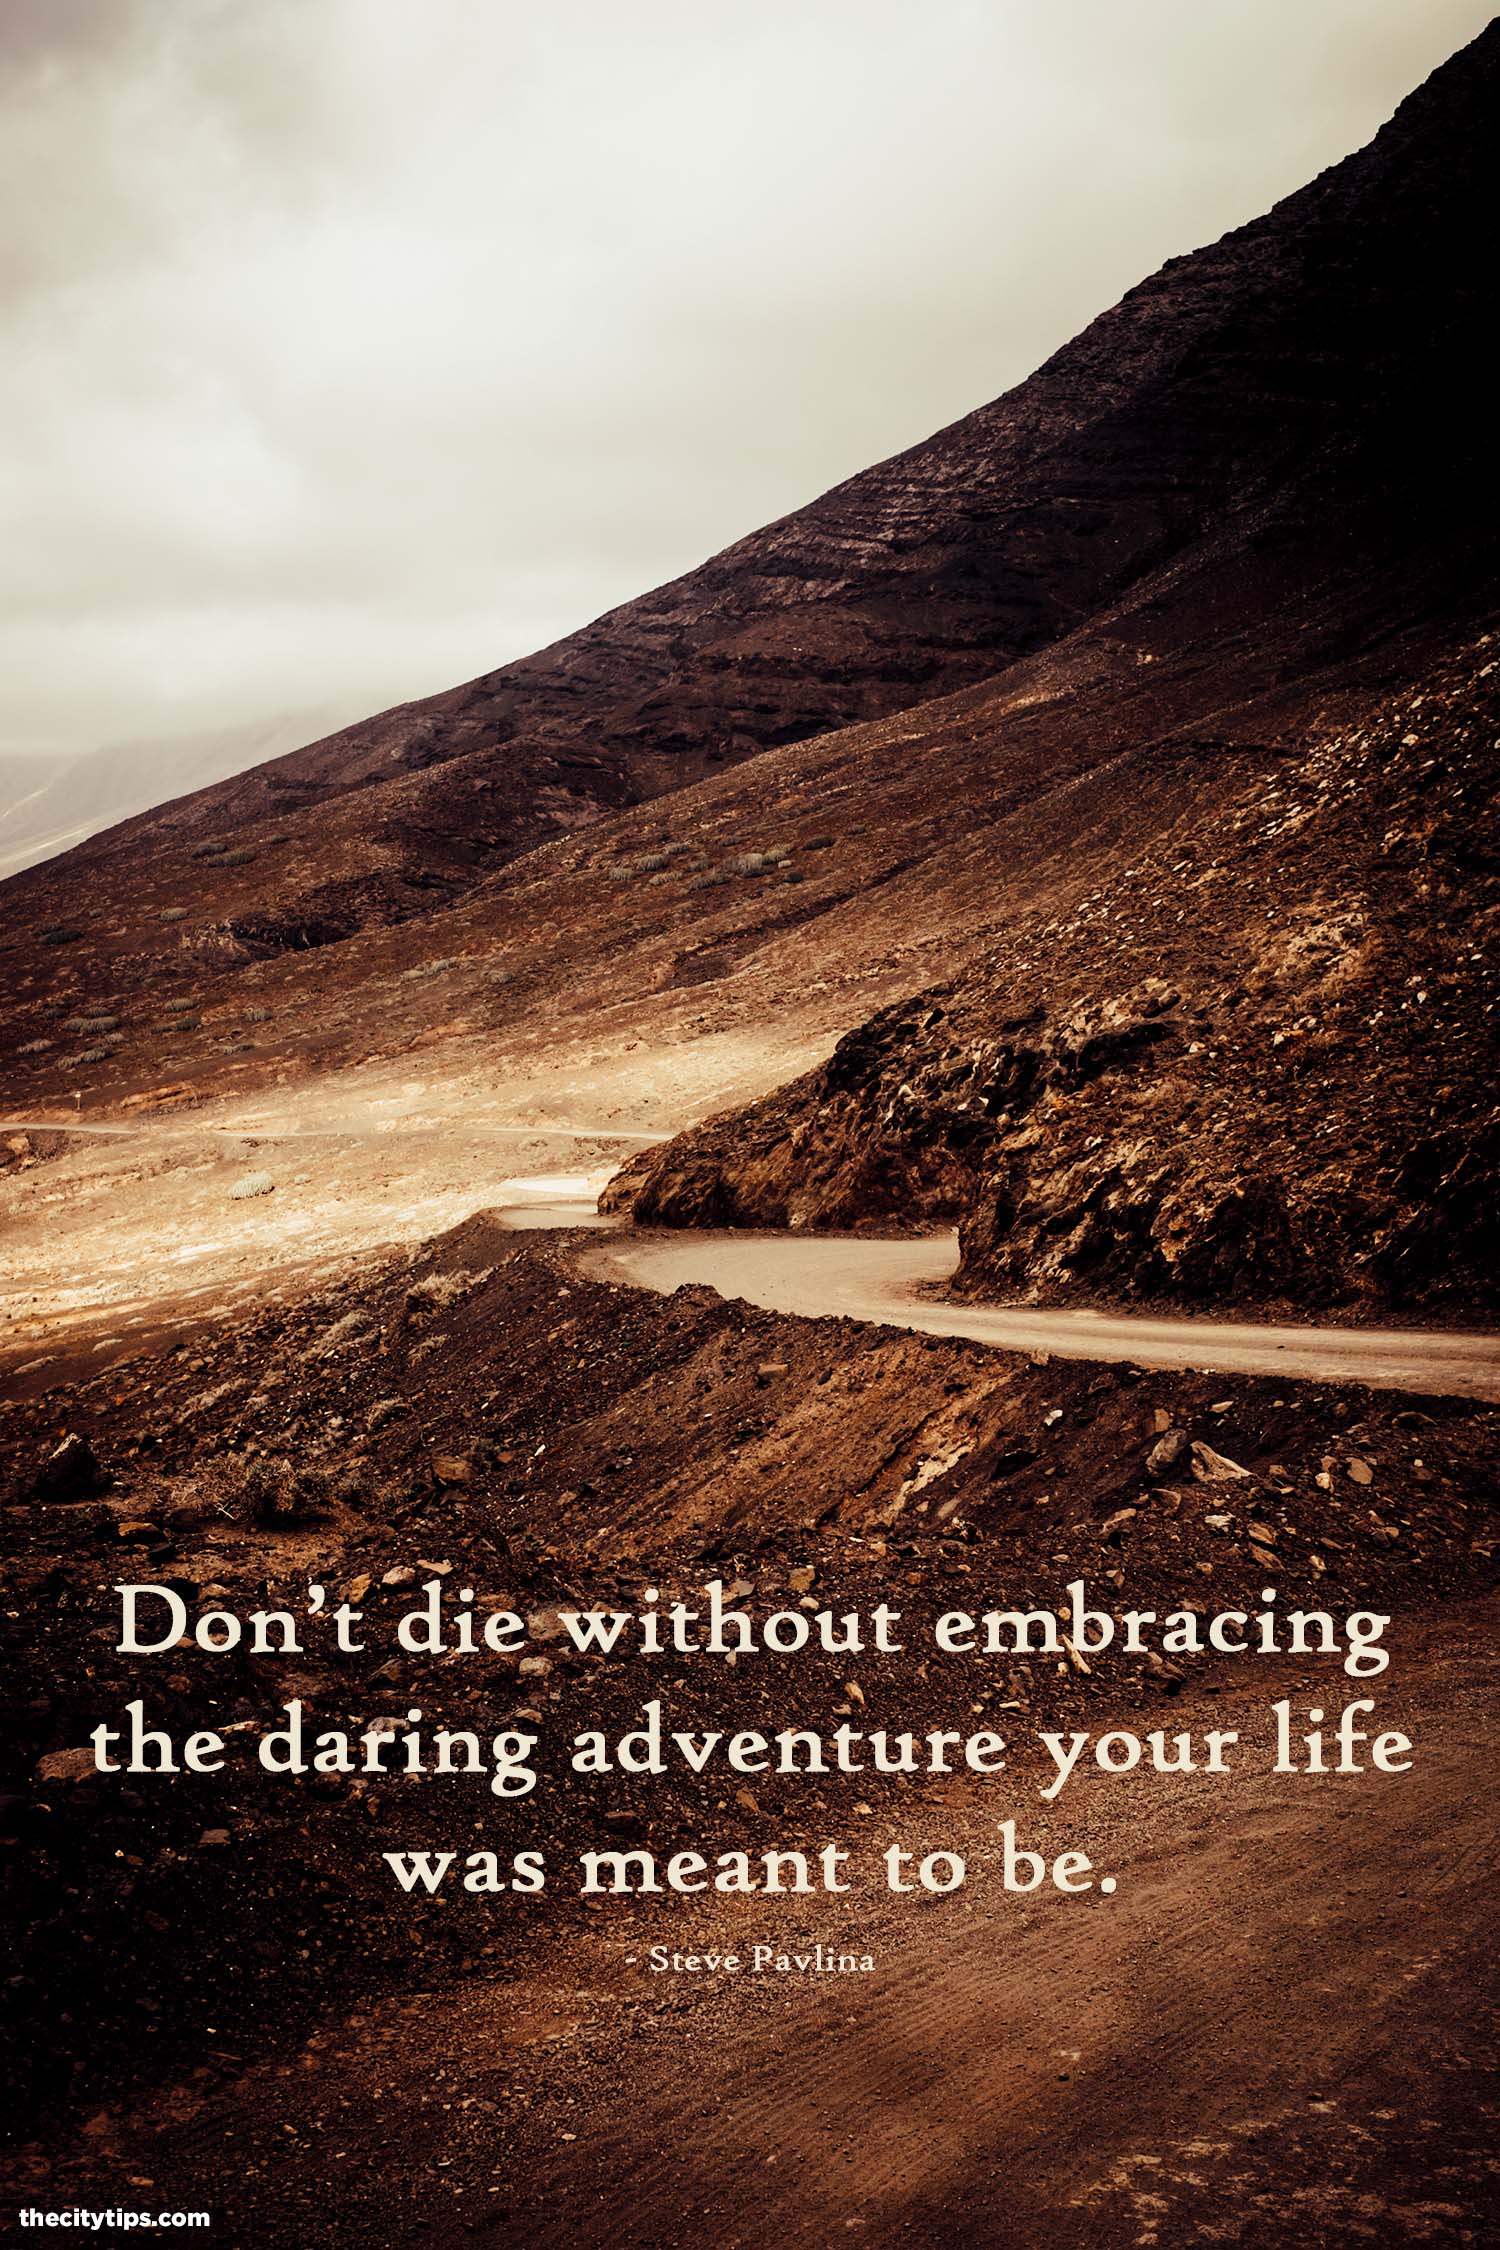 "Don't die without embracing the daring adventure your life was meant to be." by Steve Pavlina